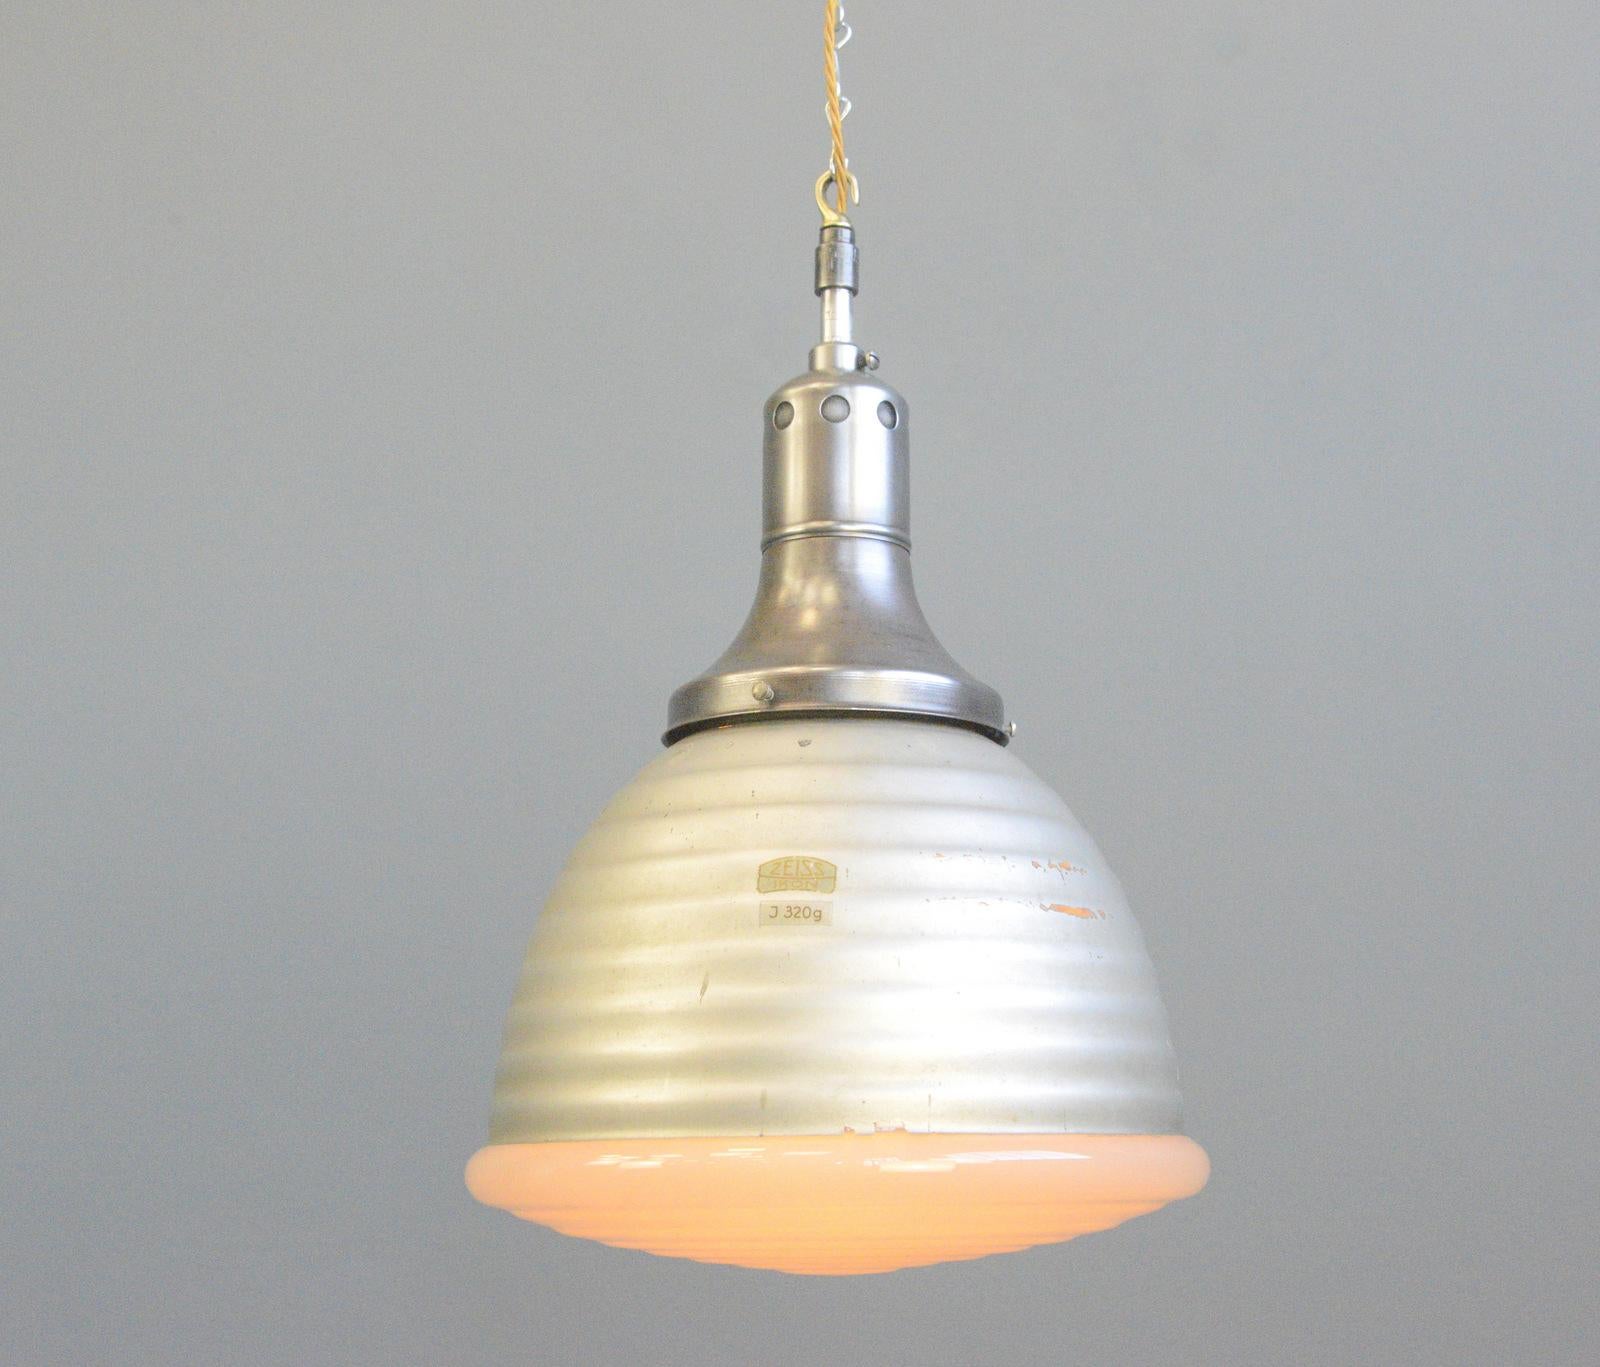 Mercury glass pendant light by Adolf Meyer For Zeiss 1930s

- Acid etched glass bottom with mercury glass body
- Original copper top
- Takes E27 fitting bulbs
- Comes with 100cm of gold braided cable
- Designed by Adolf Meyer
- Produced by